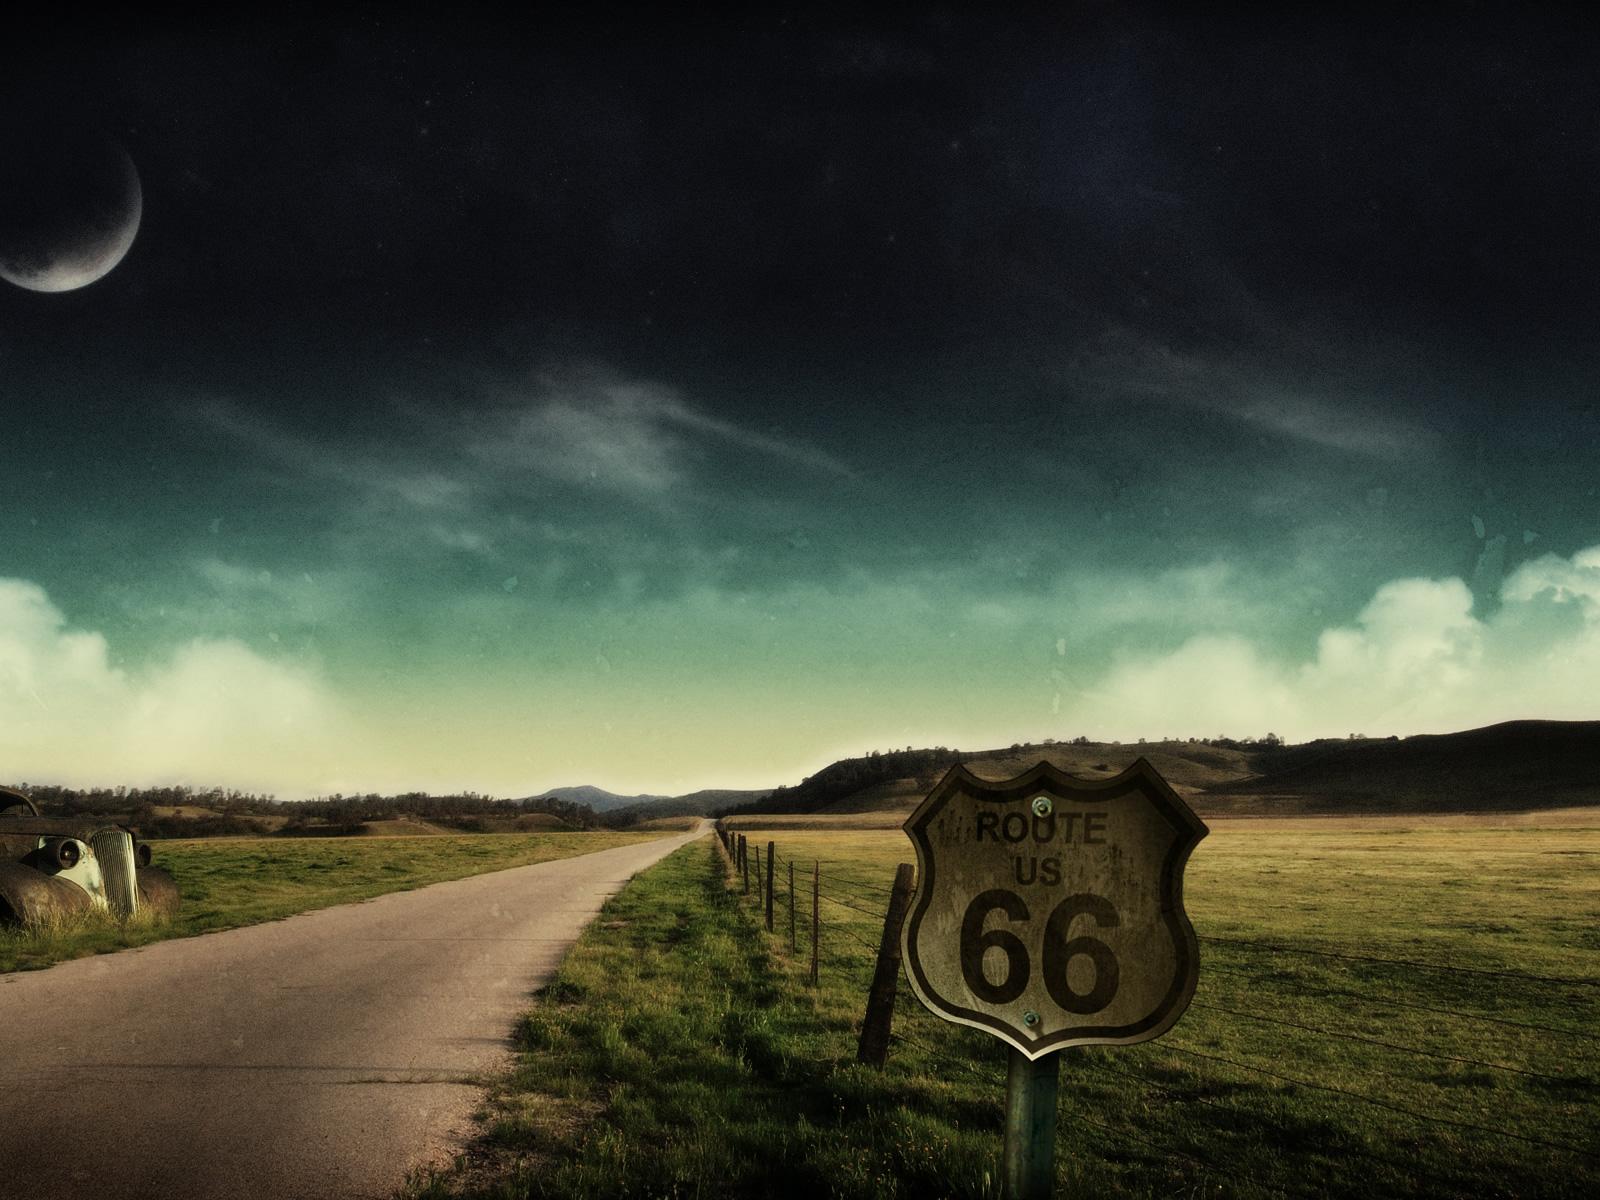 Download 1600x1200 Route 66 desktop PC and Mac wallpapers [1600x1200